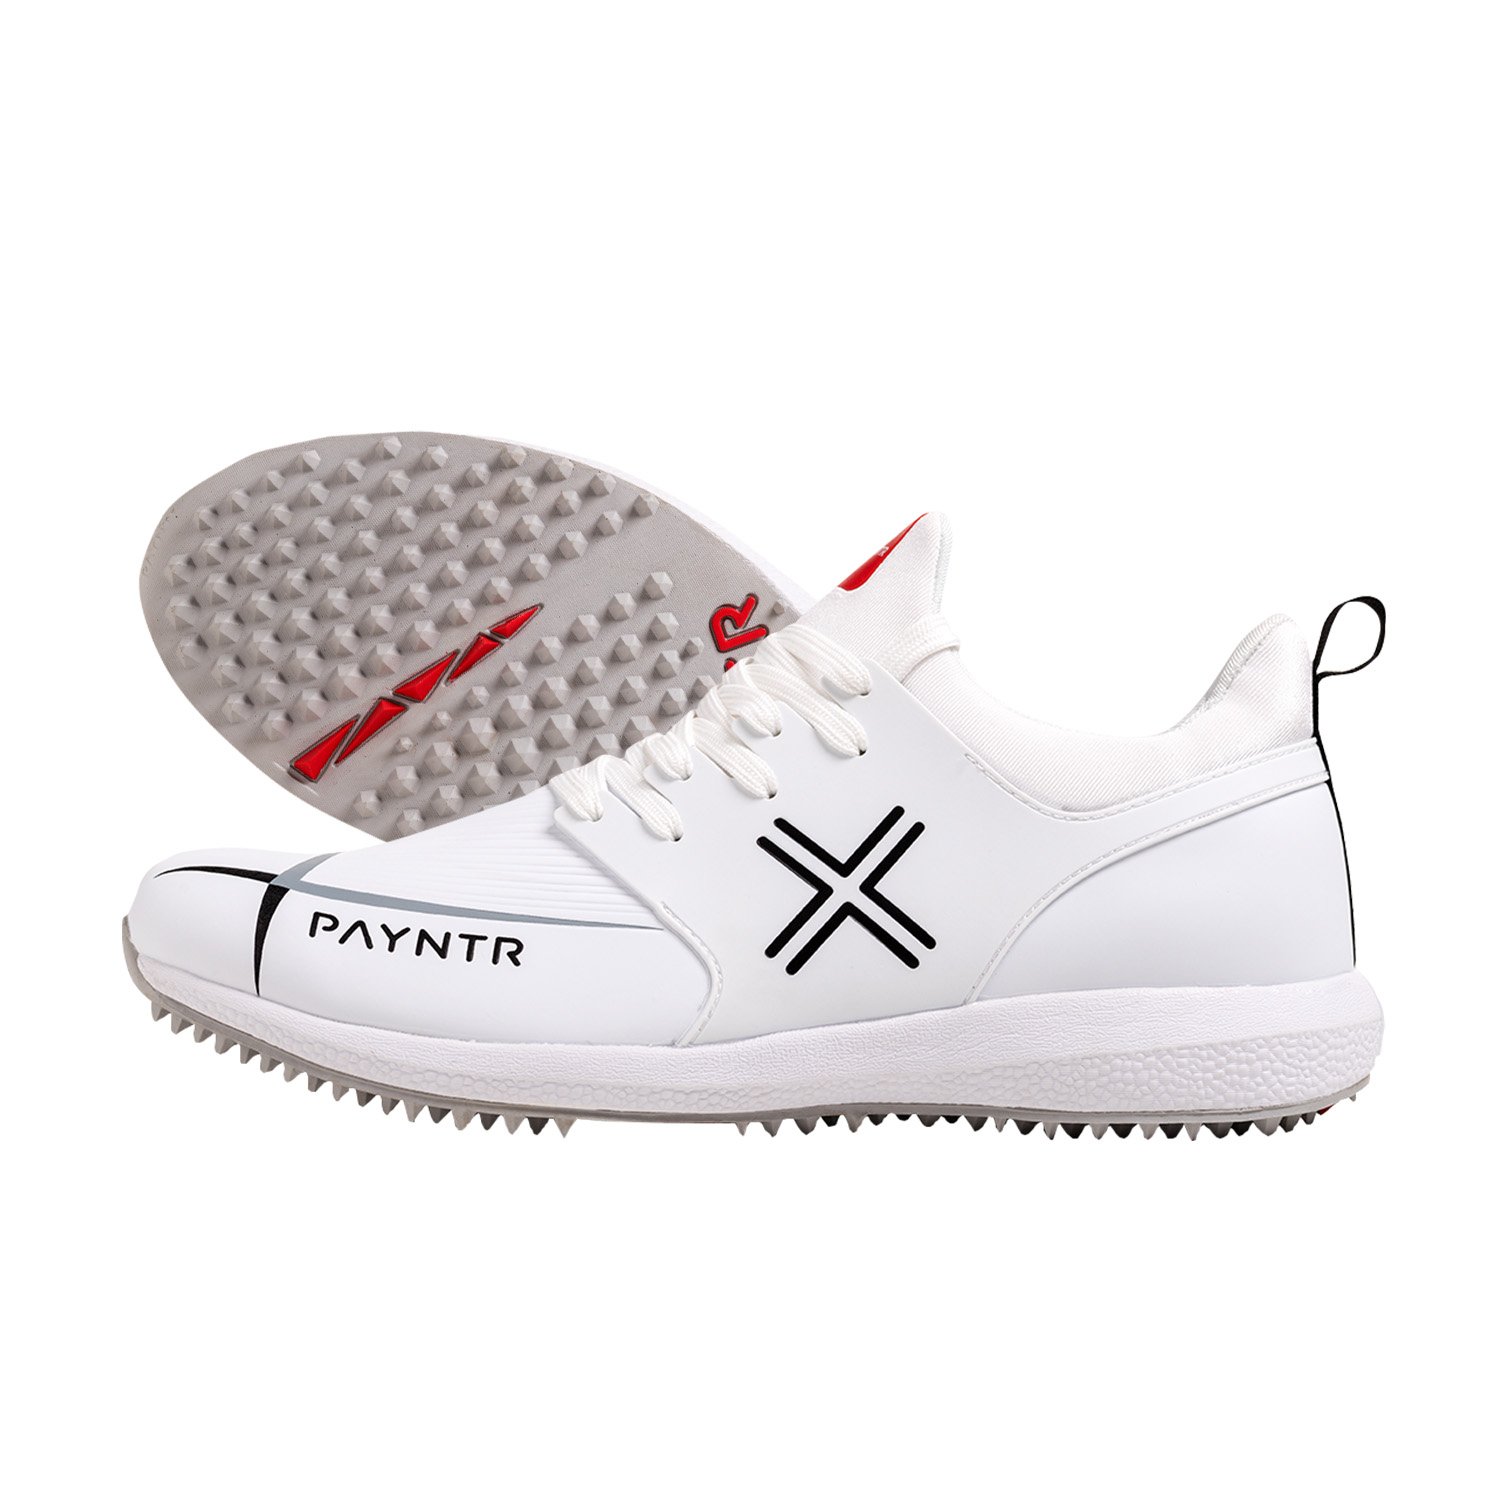 paynter cricket shoes